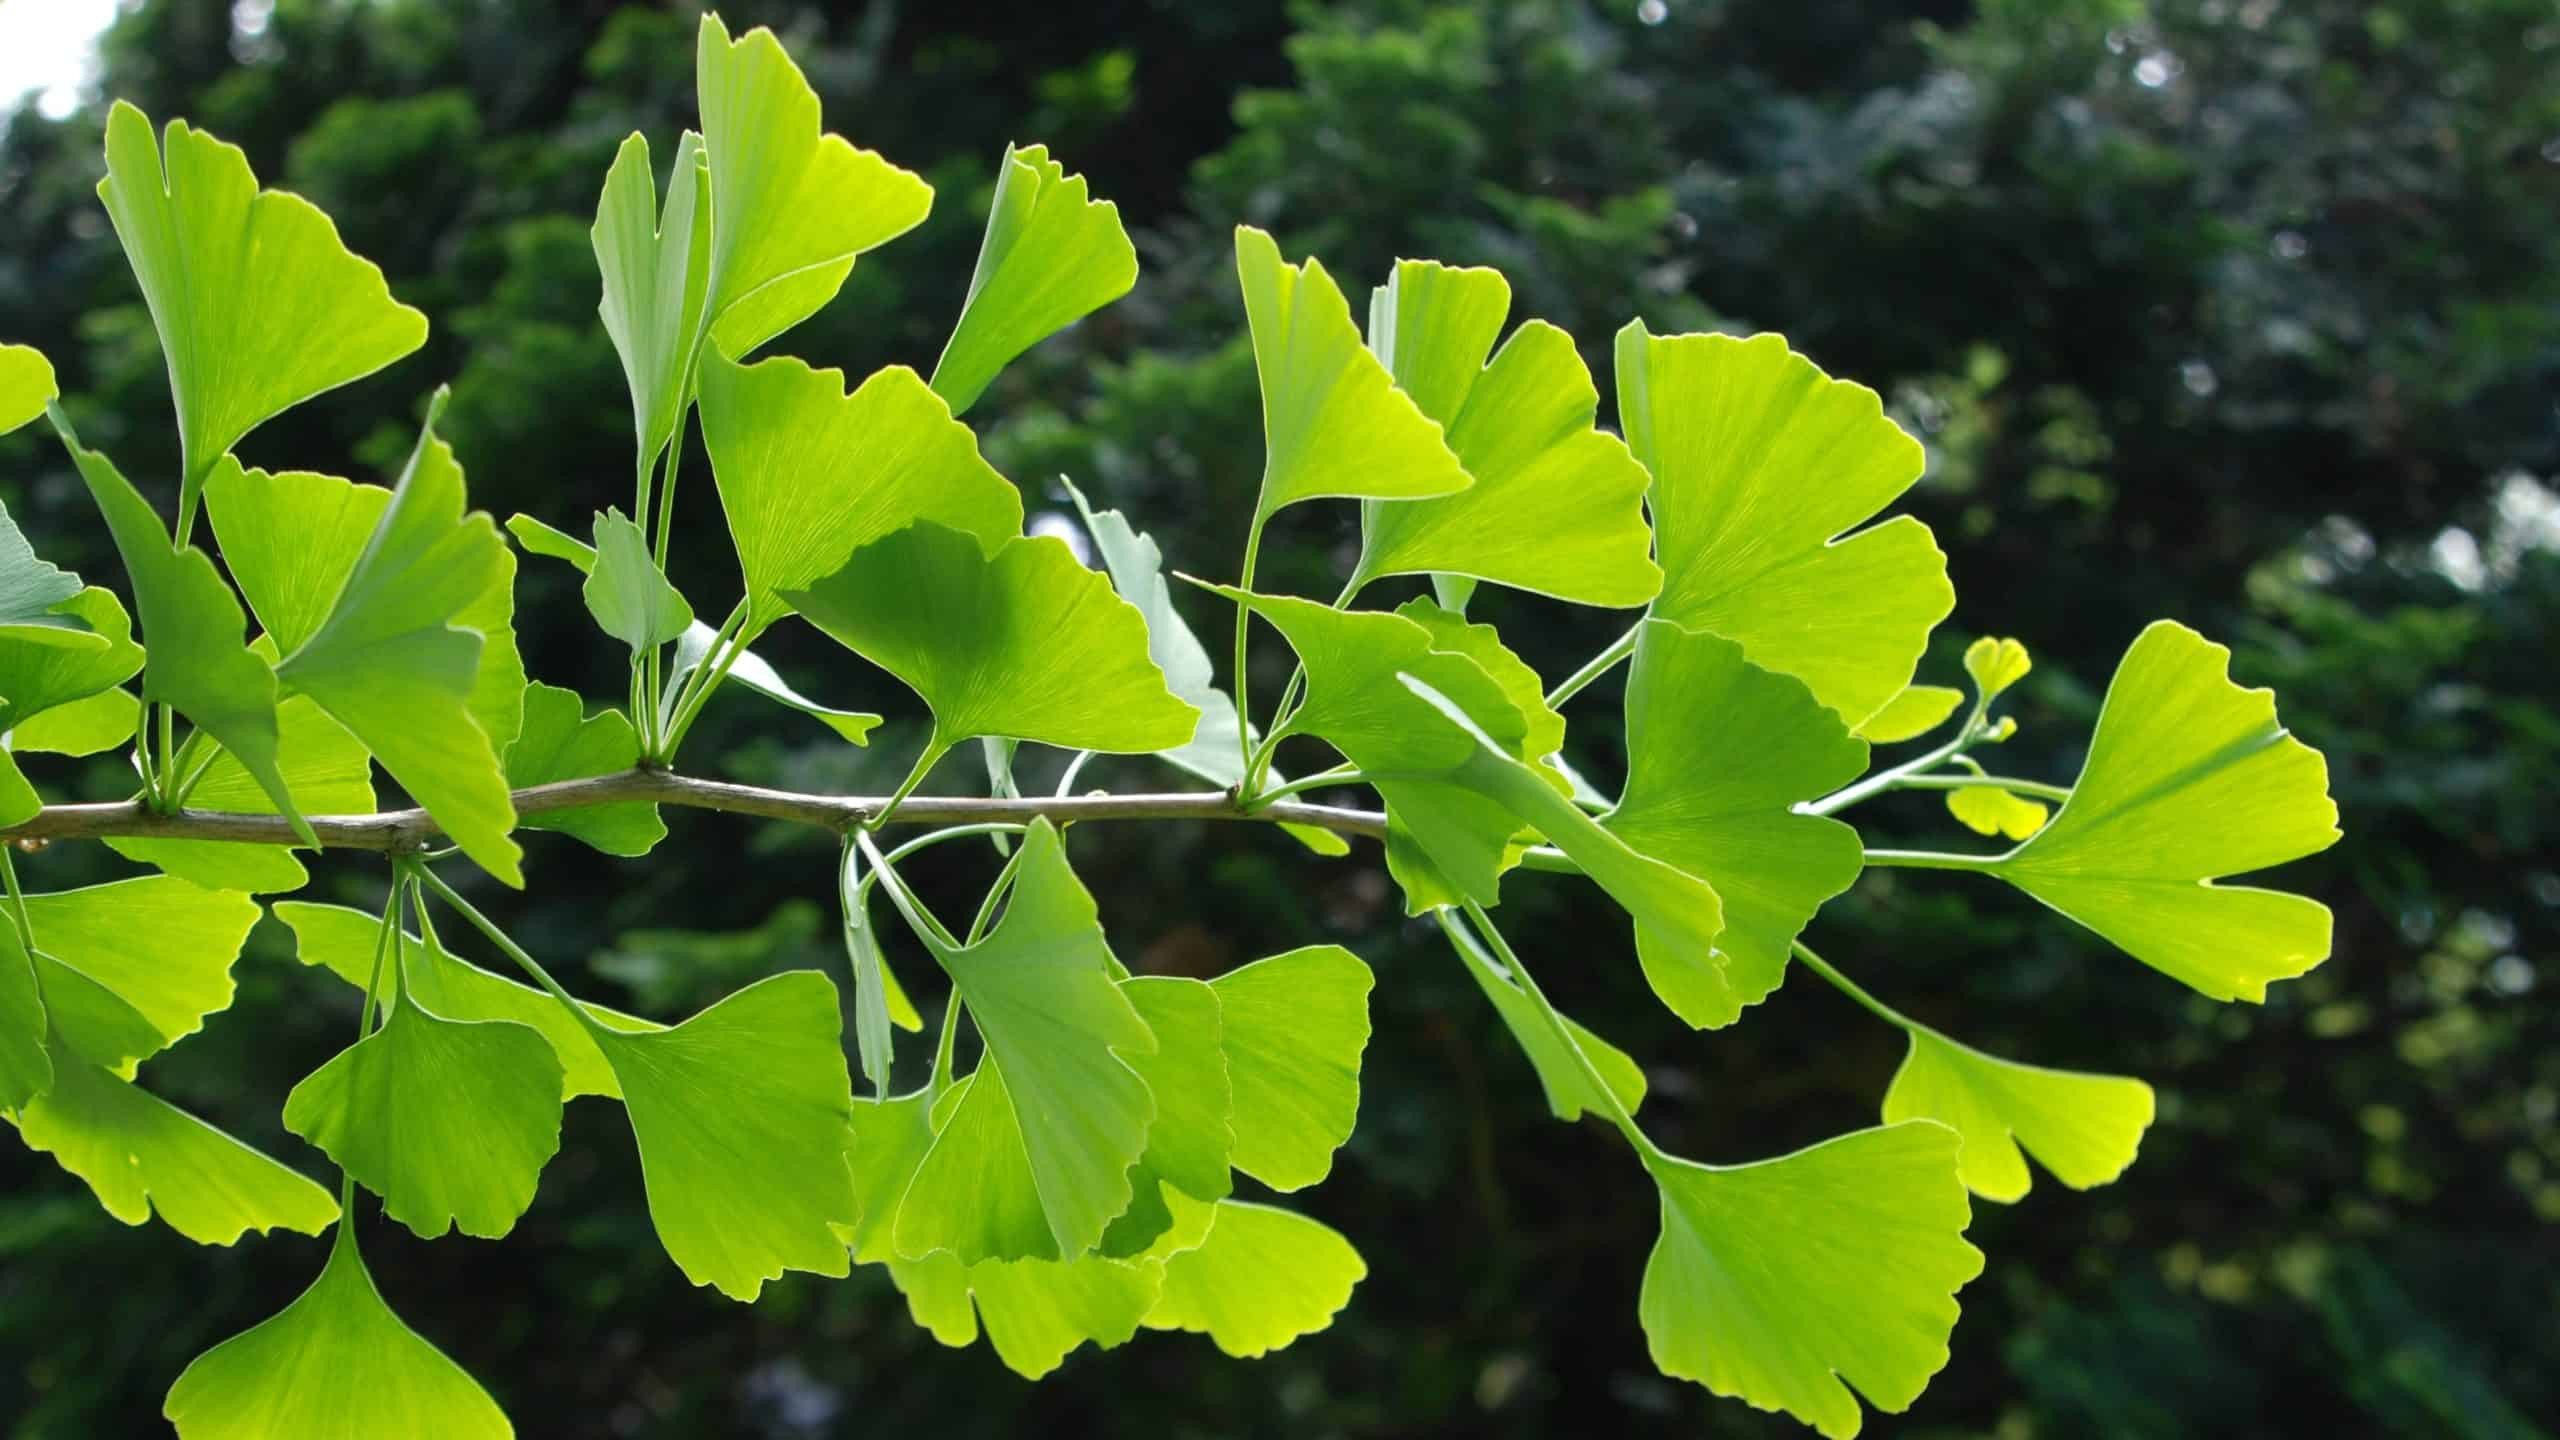 A sprig with unusual green leaves